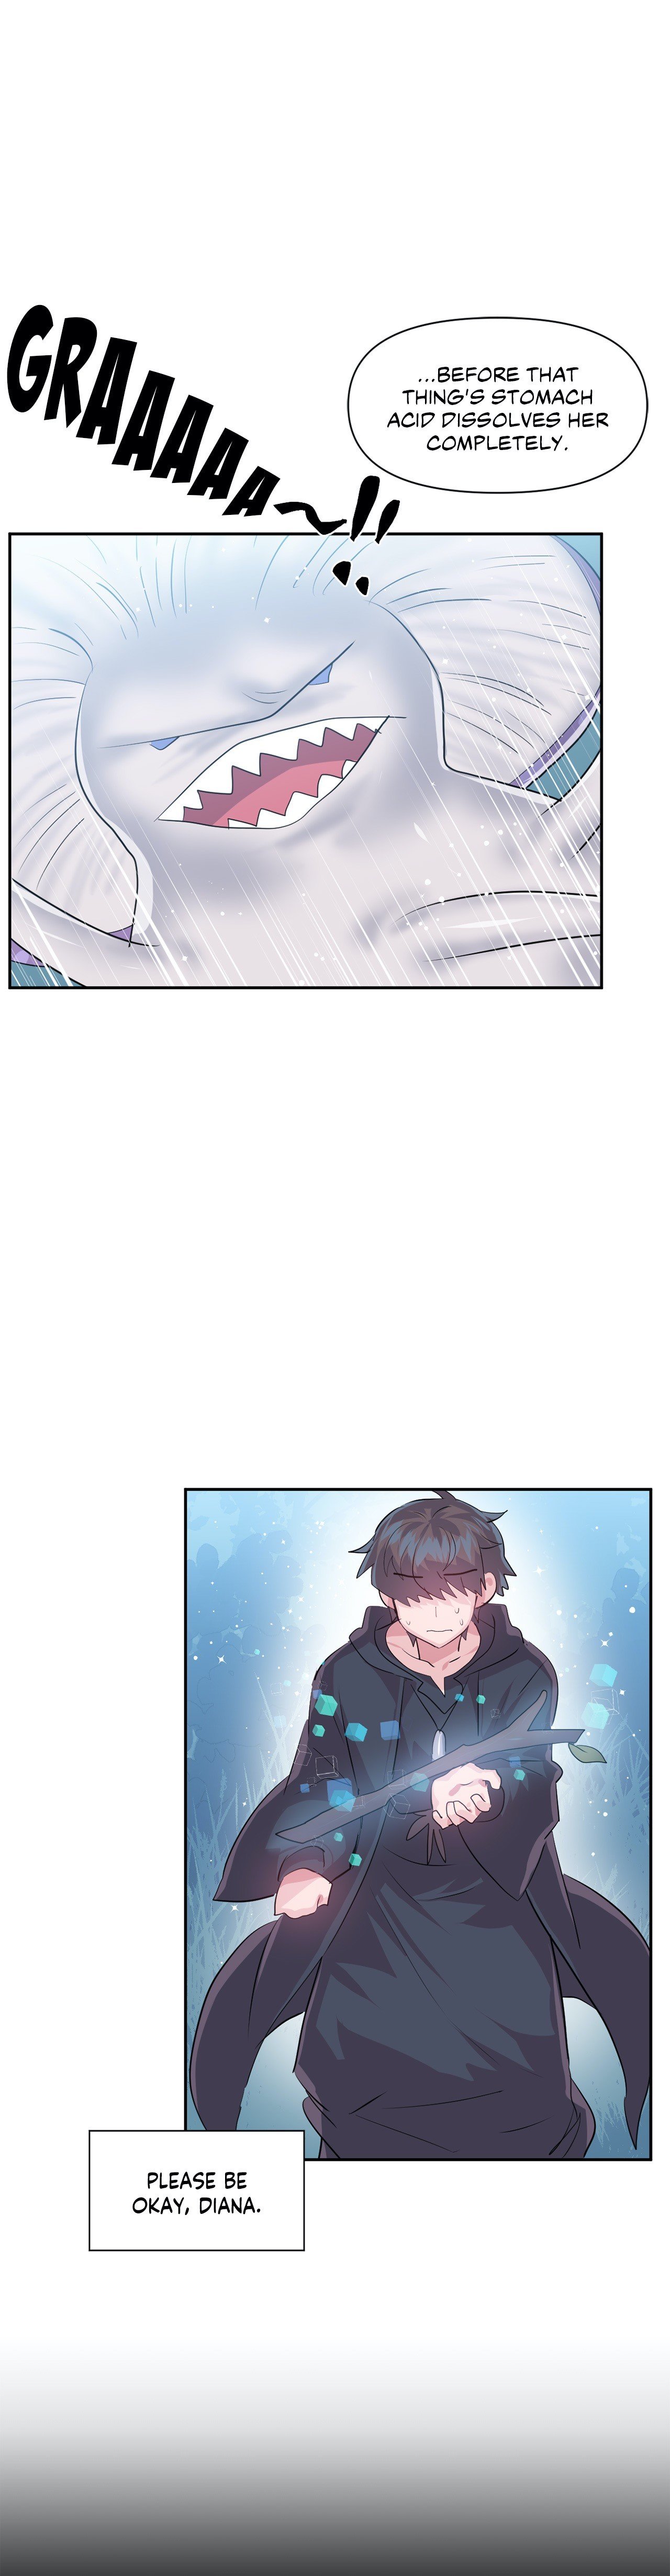 log-in-to-lust-a-land-chap-38-10